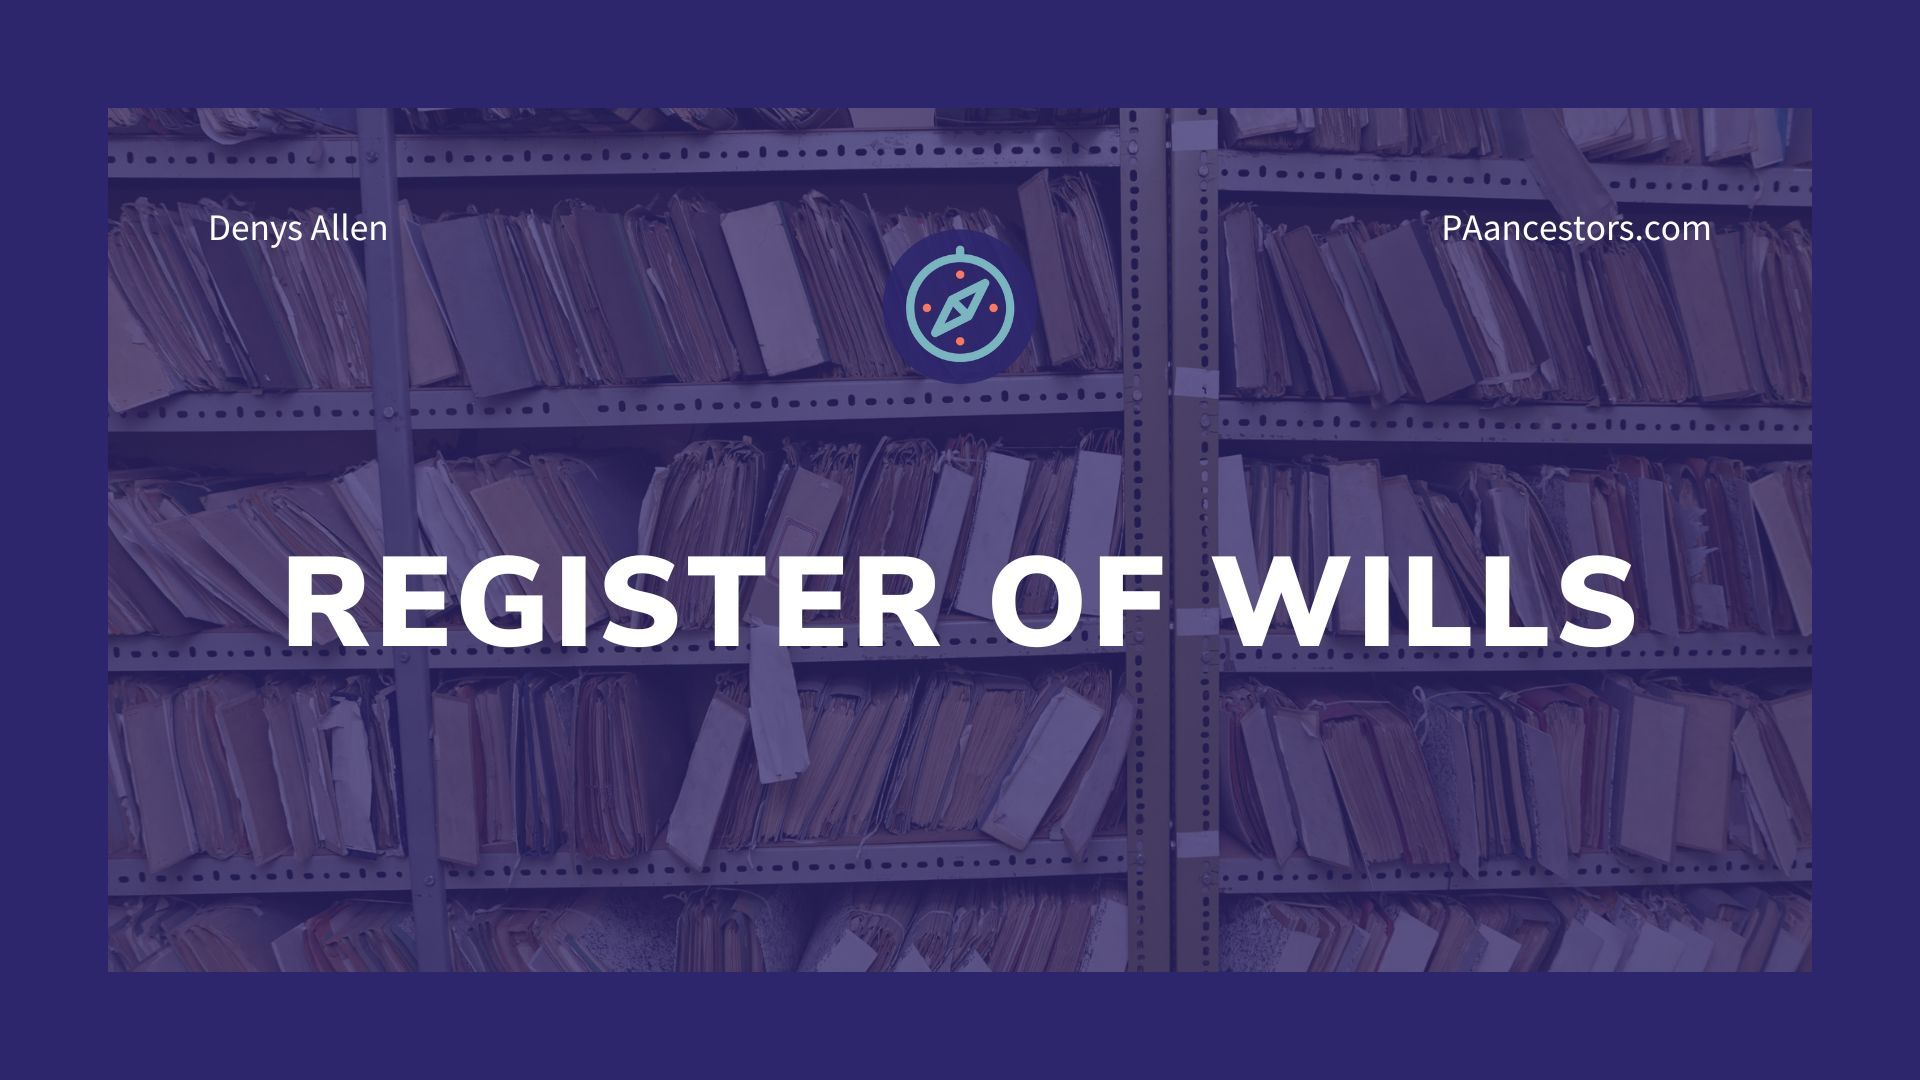 The Register of Wills Office in Pennsylvania